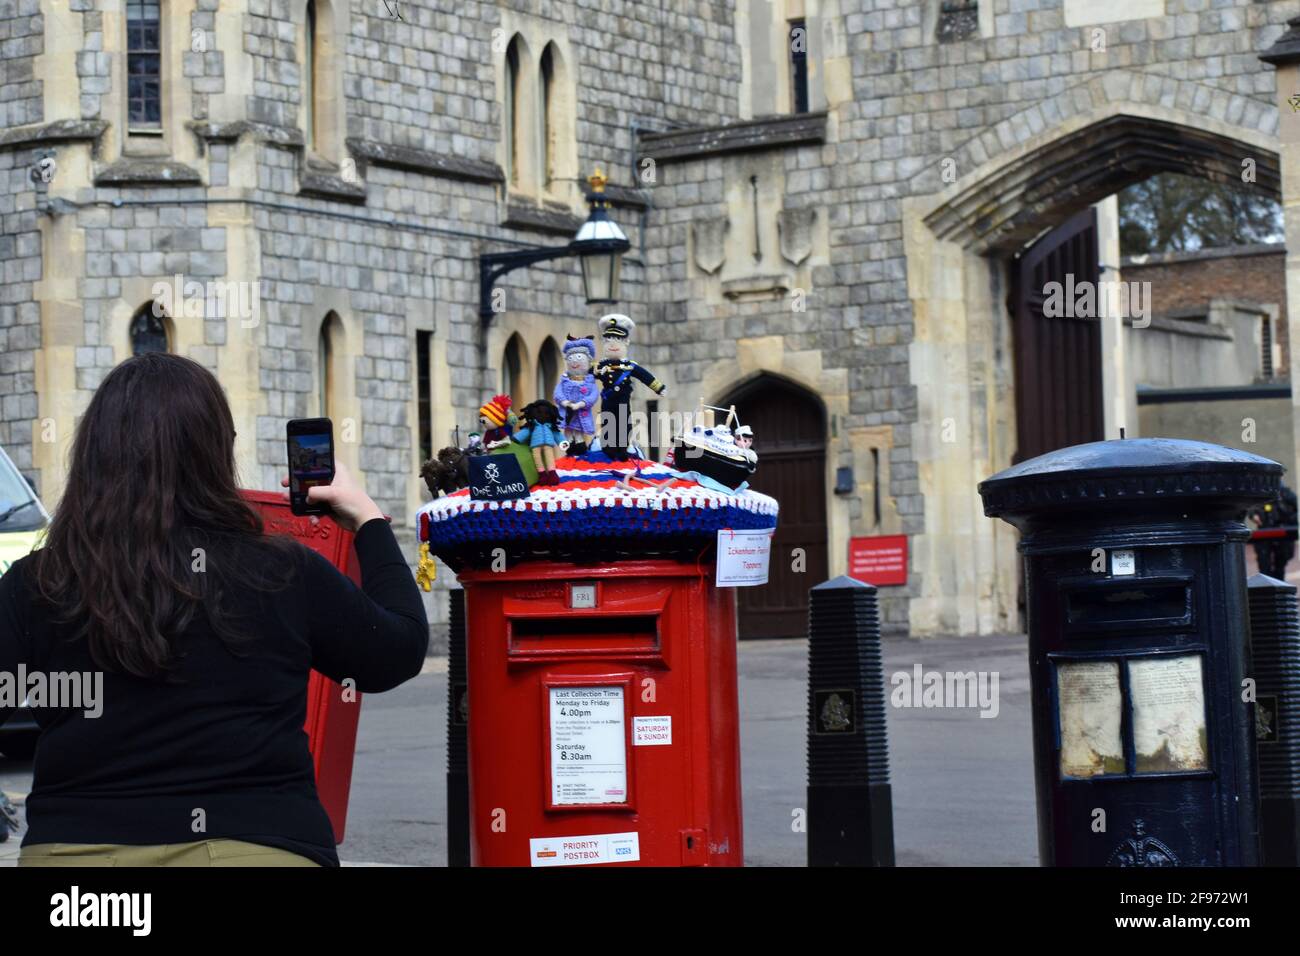 Windsor, UK, 16 April 2020  Ickenham Postbox Toppers, depicting Queen Elizabeth II and her husband Prince Philip, Duke Of Edinburgh on top of  the post box outside Windsor castle. Tributes to Prince Phillip laid outside Windsor Castle. Windsor castle busy with tourists as well as preparations for Prince Phillip, the Duke of Edinburgh funeral. Credit: JOHNNY ARMSTEAD/Alamy Live News Stock Photo